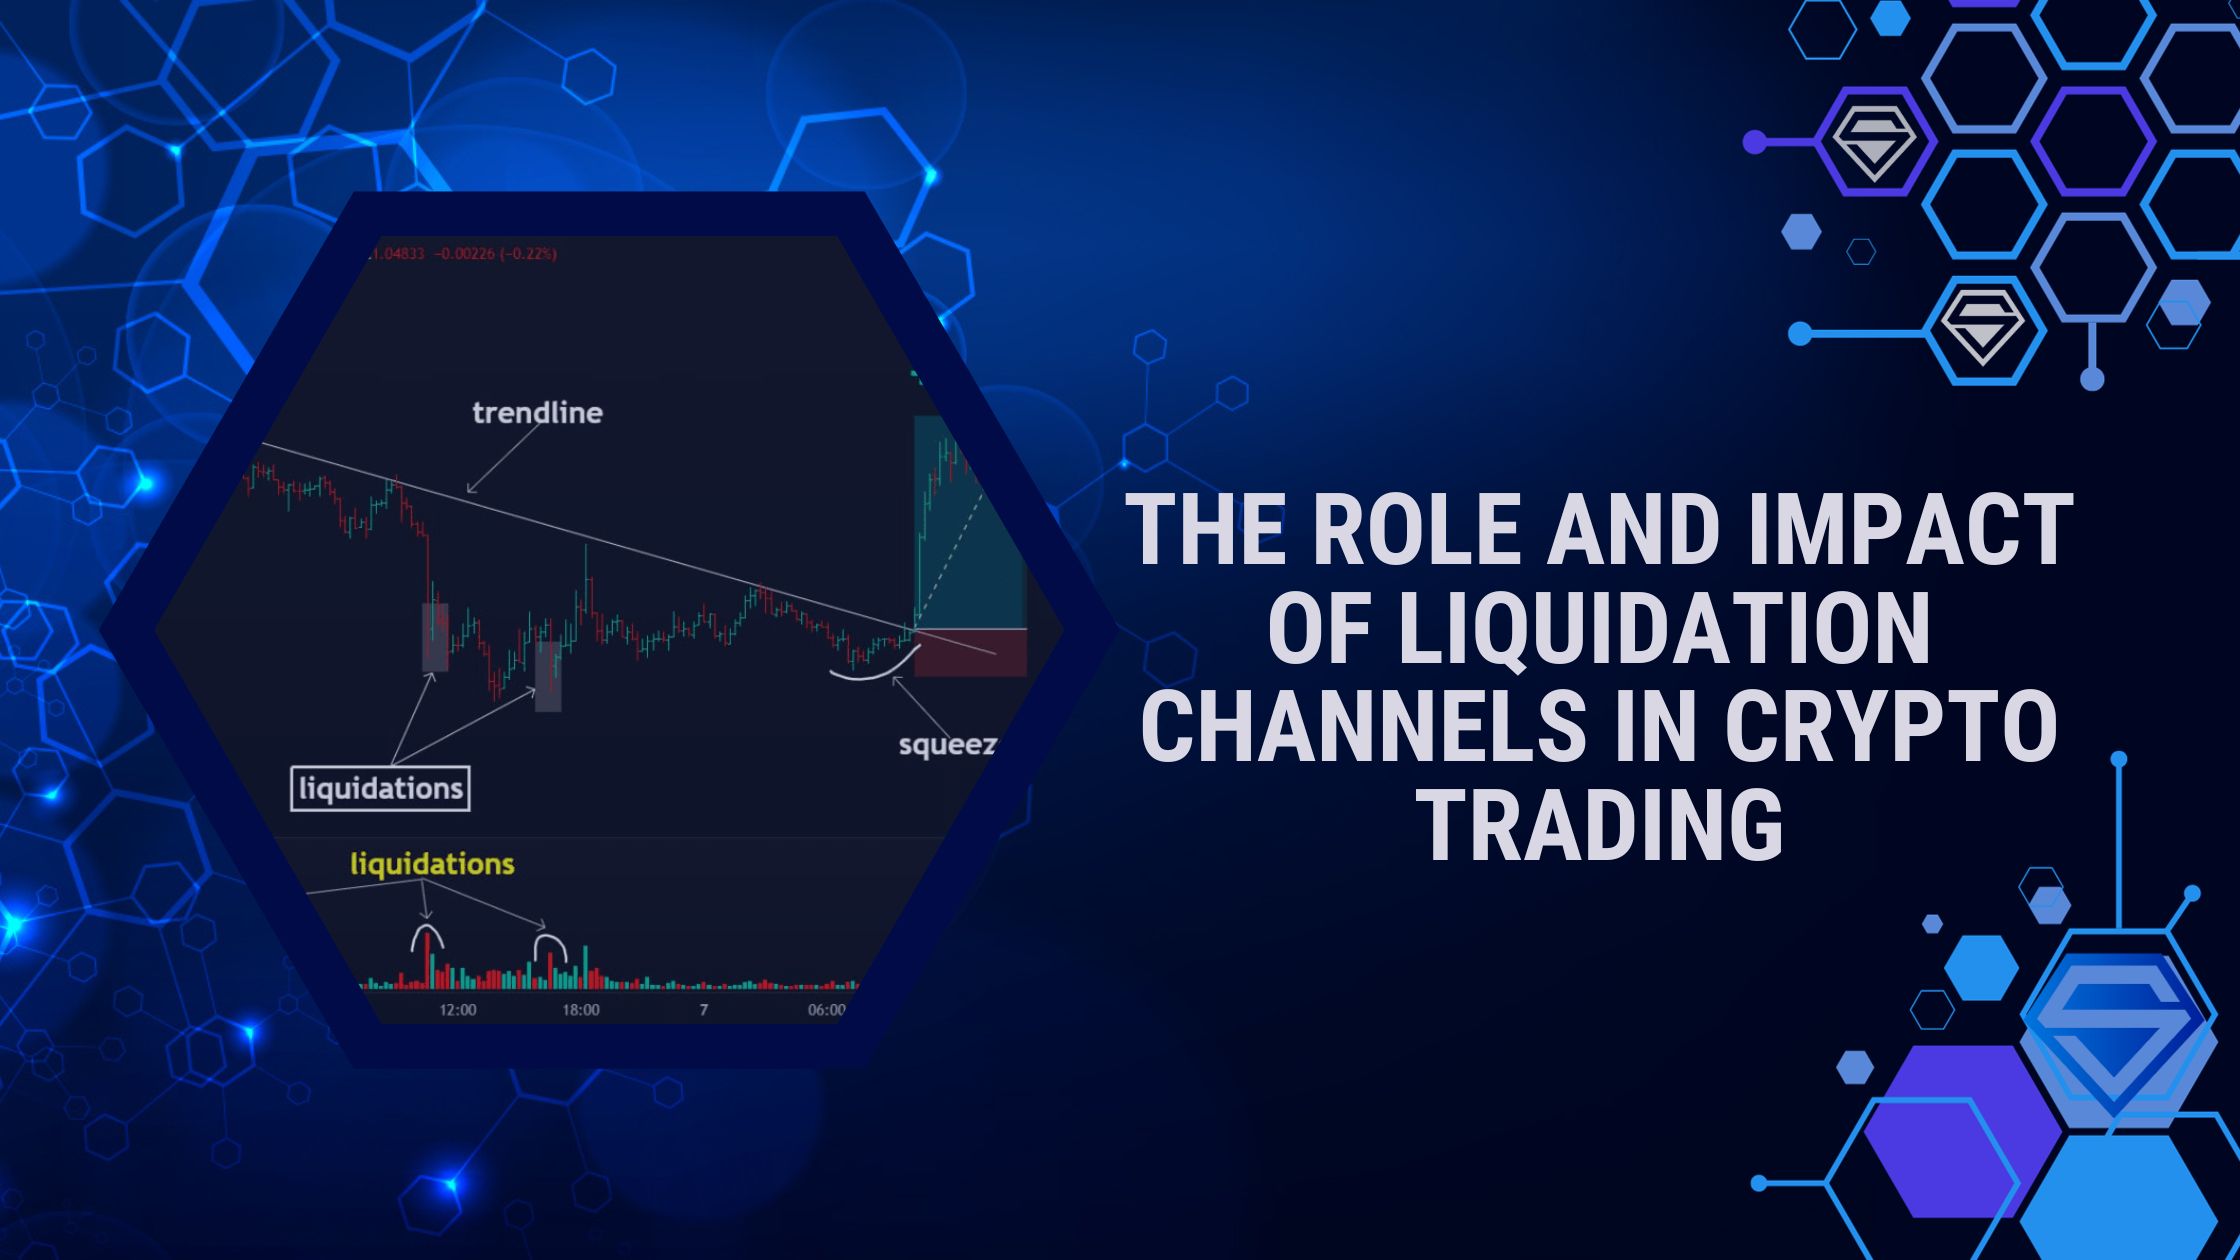 The Role and Impact of Liquidation Channels in Crypto Trading